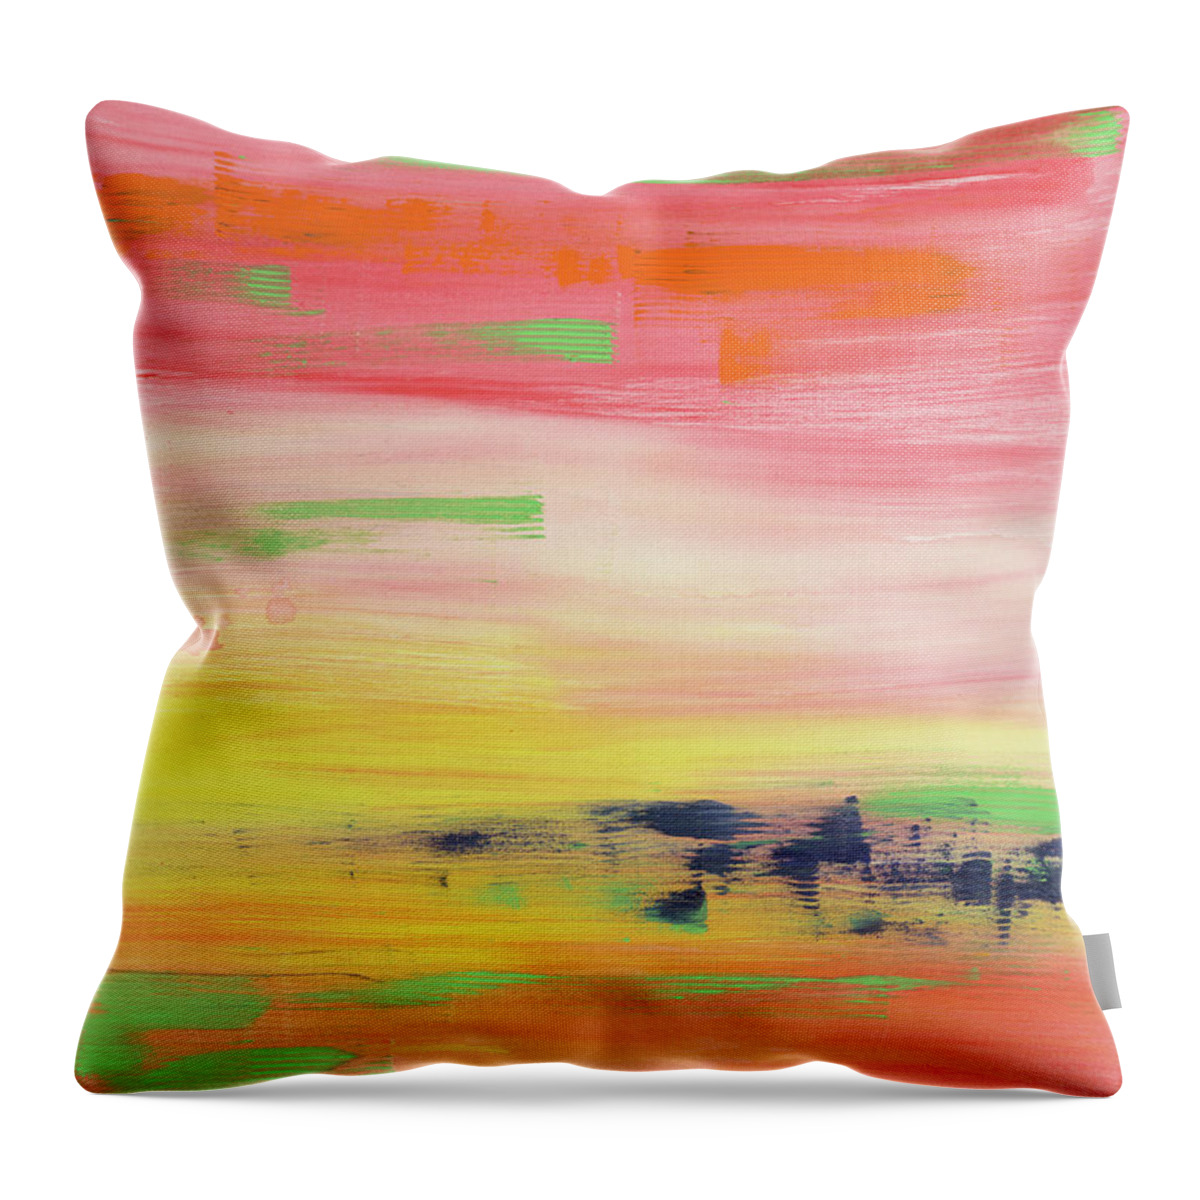 Abstract Throw Pillow featuring the painting High Vibration 1 by Angela Bushman